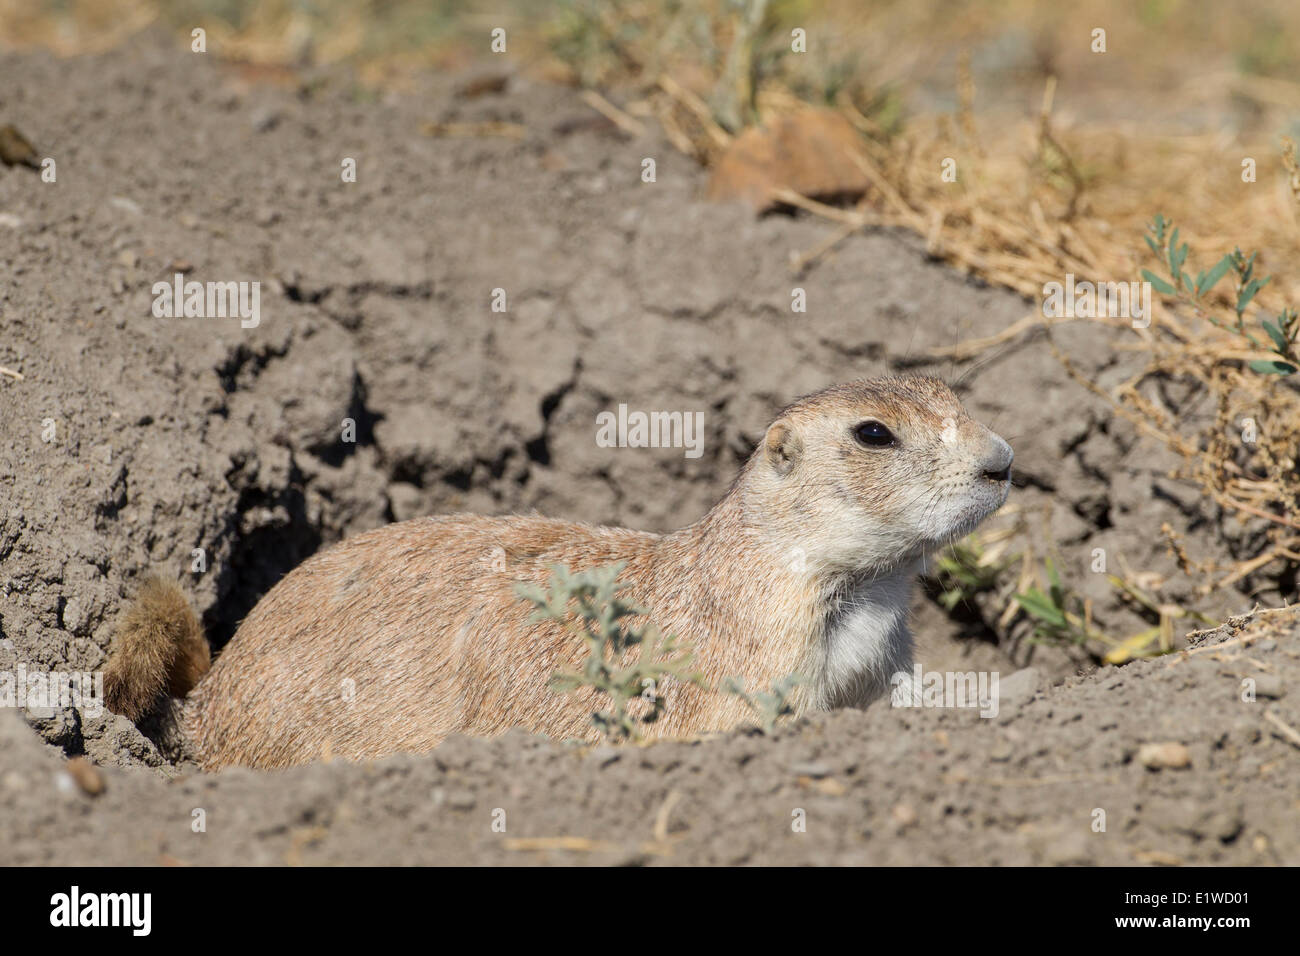 A Black-tailed Prairie Dog (Cynomys ludovicianus) takes a look around outside its burrow or hole in a dog town in the West Stock Photo